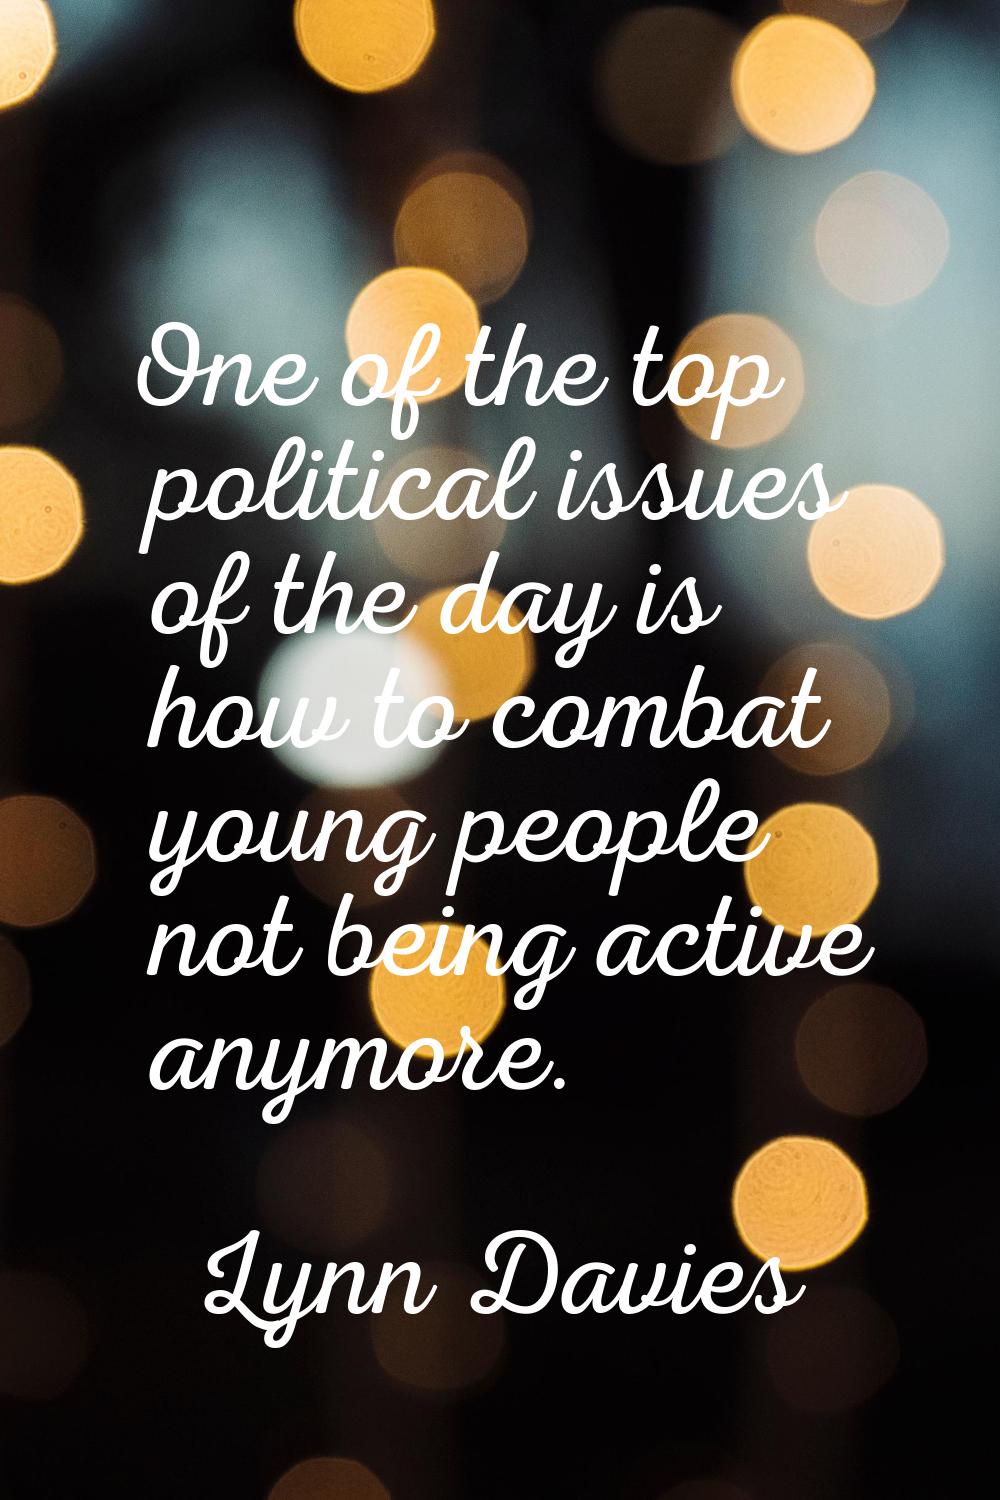 One of the top political issues of the day is how to combat young people not being active anymore.